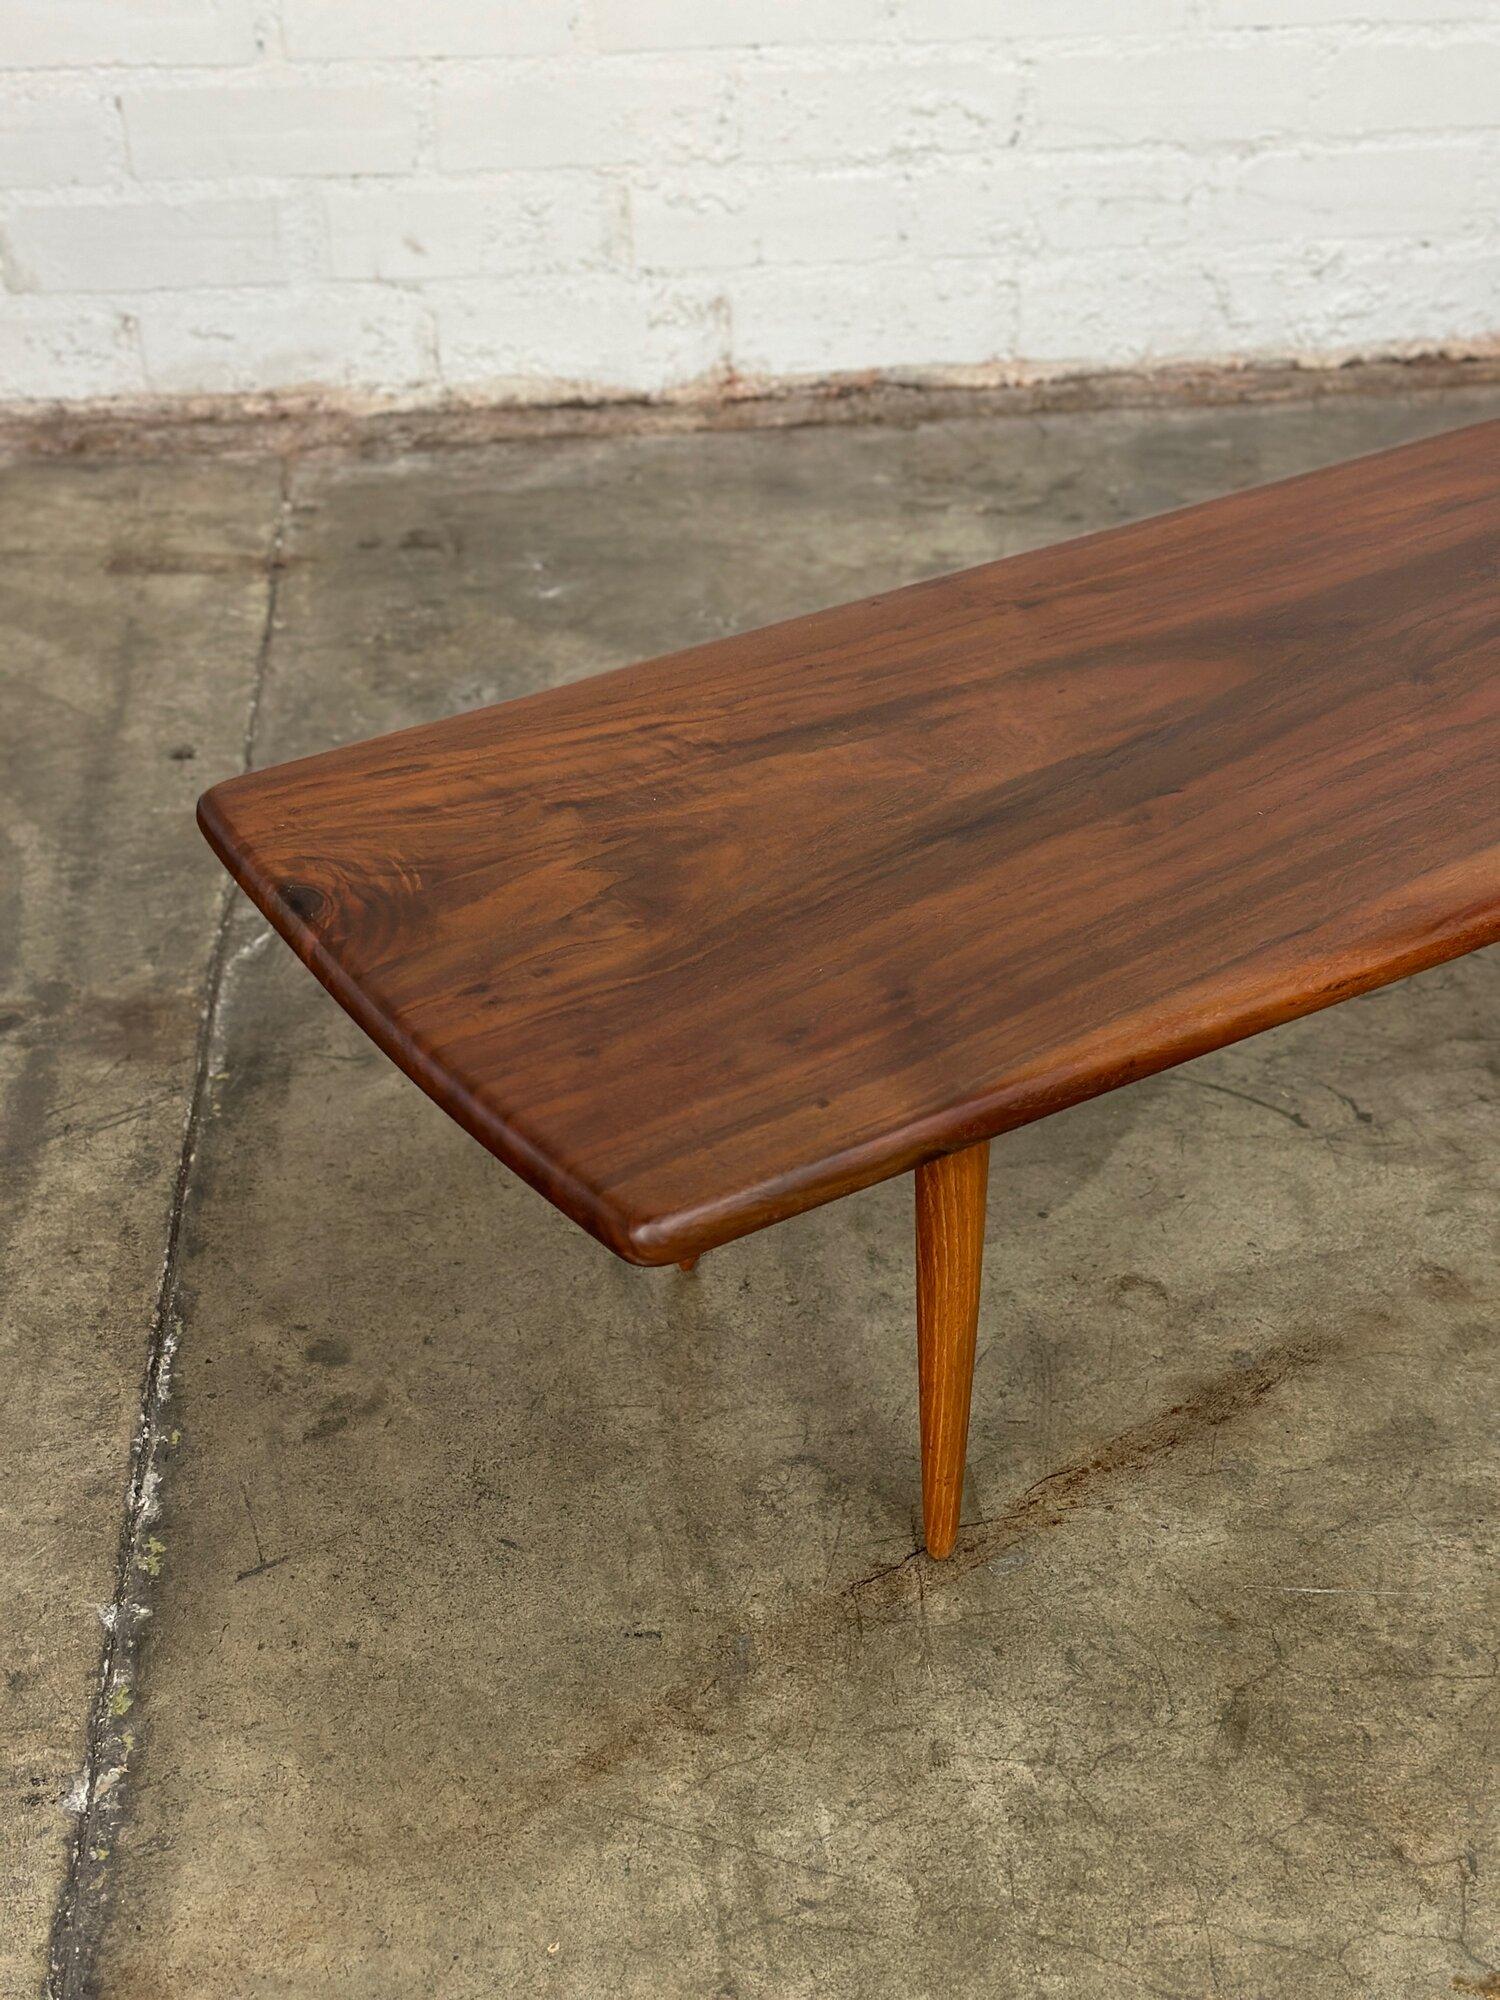 W52.5 D17.5 H13.75

Fully restored solid walnut coffee table in great condition. Item is structurally sound and sturdy. Item features rare solid wood construction with soft rounded edges. 